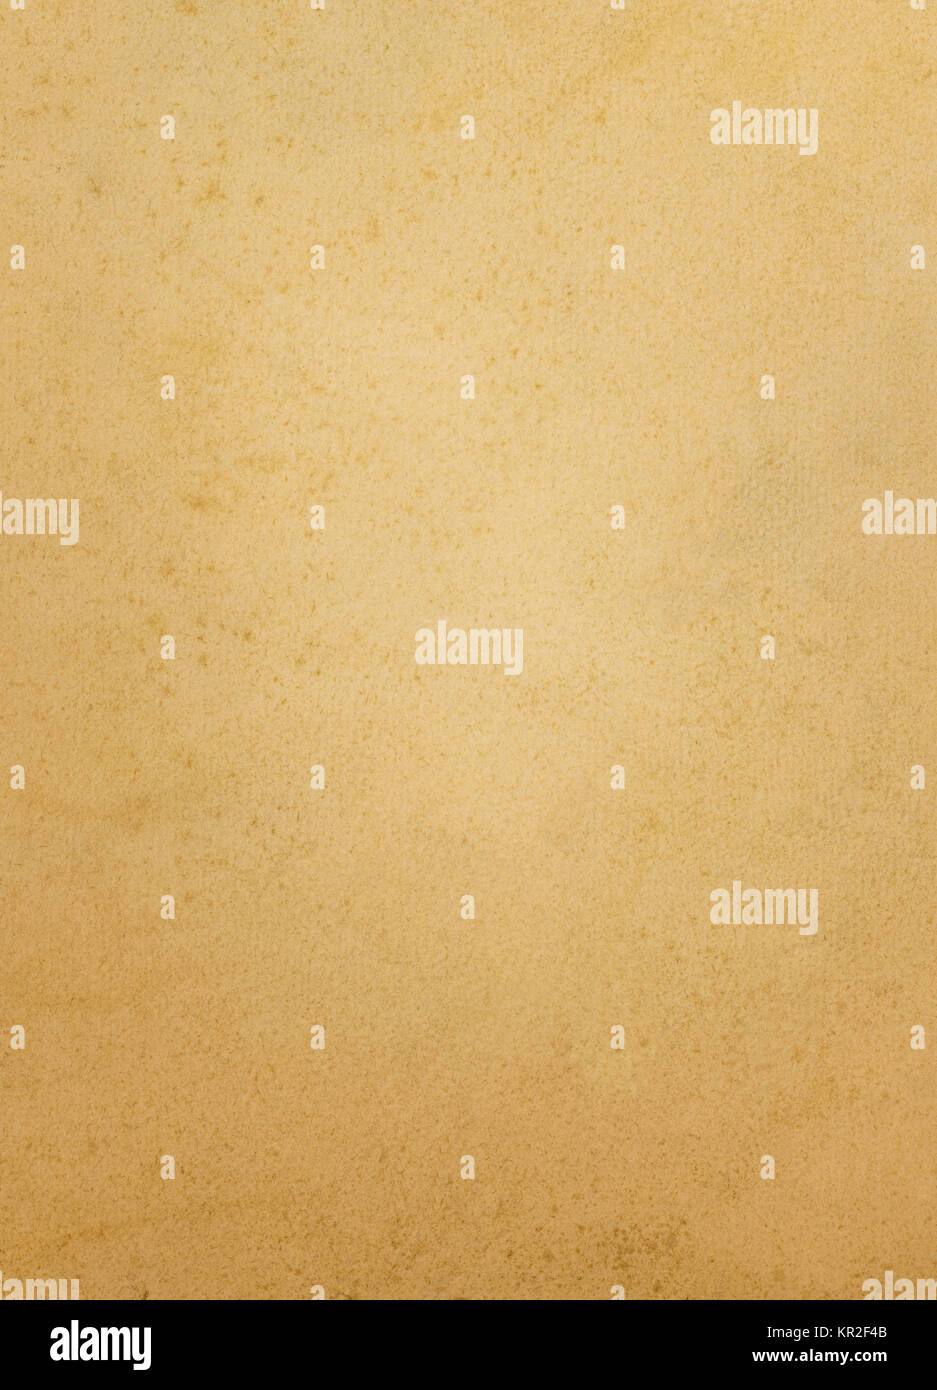 Brown paper texture background Stock Photo